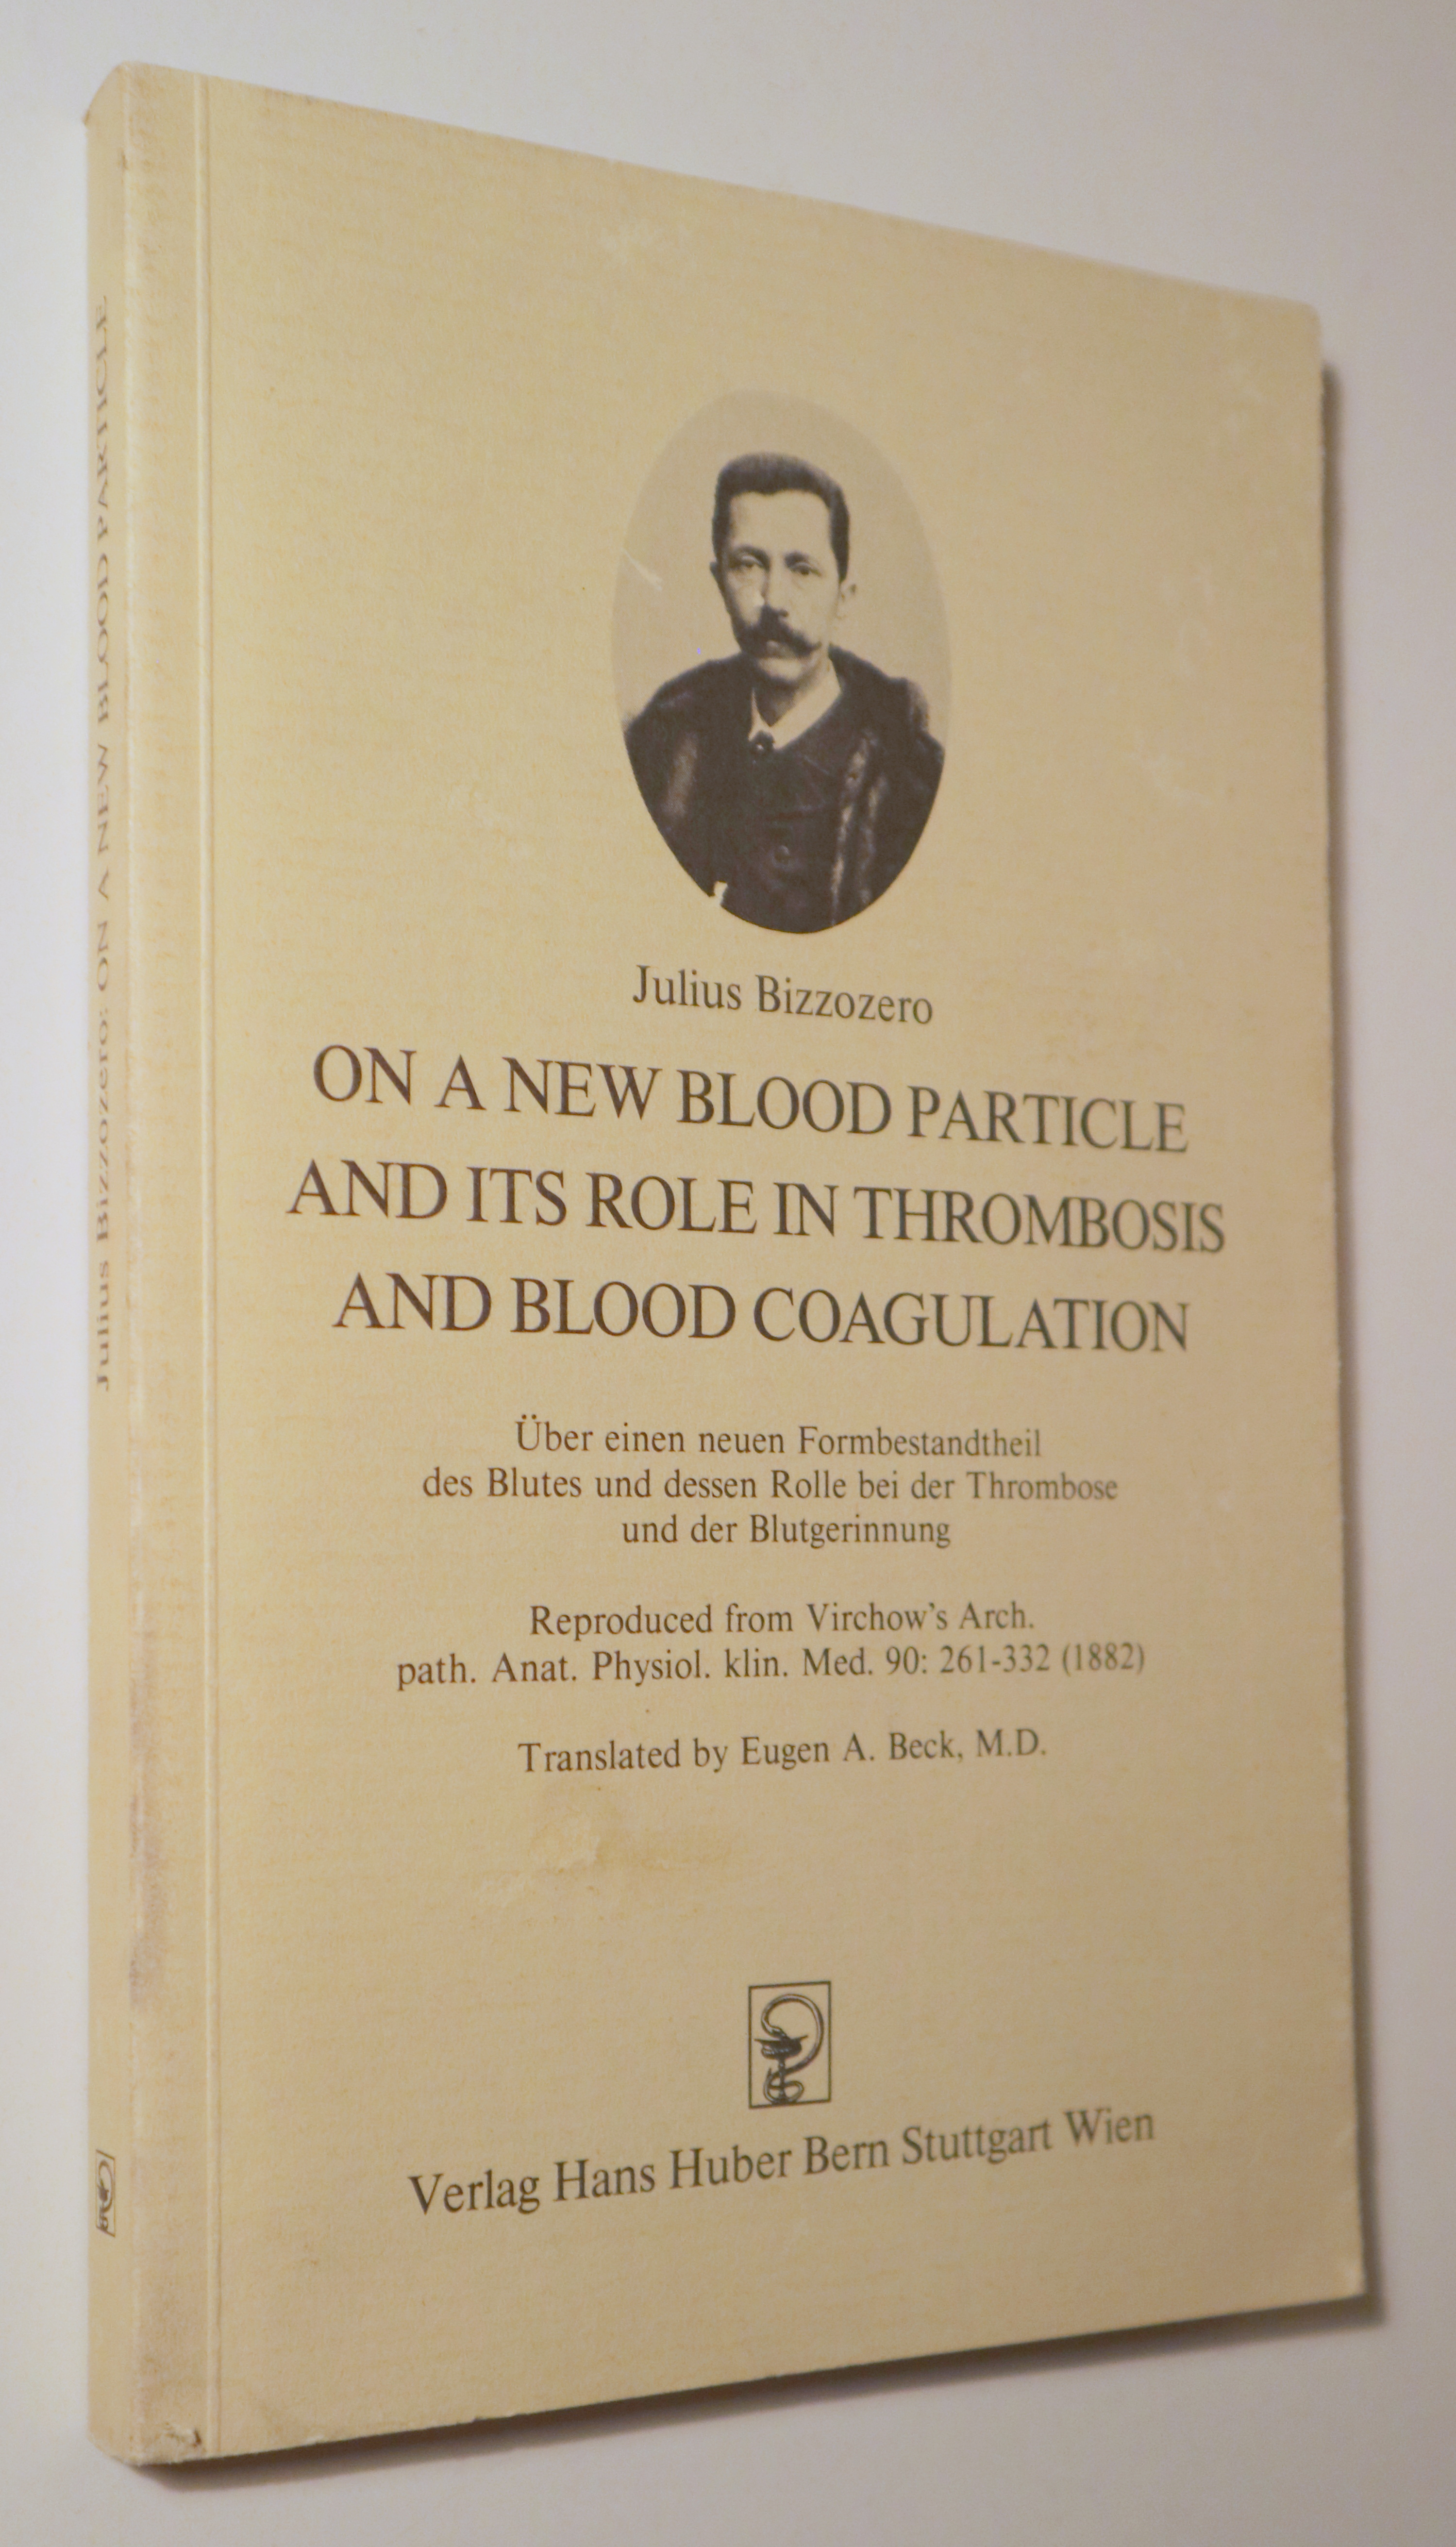 ON A NEW BLOOD PARTICLE AND ITS ROLE IN THROMBOSIS AND BLOOD COAGULATION - Wien  1982